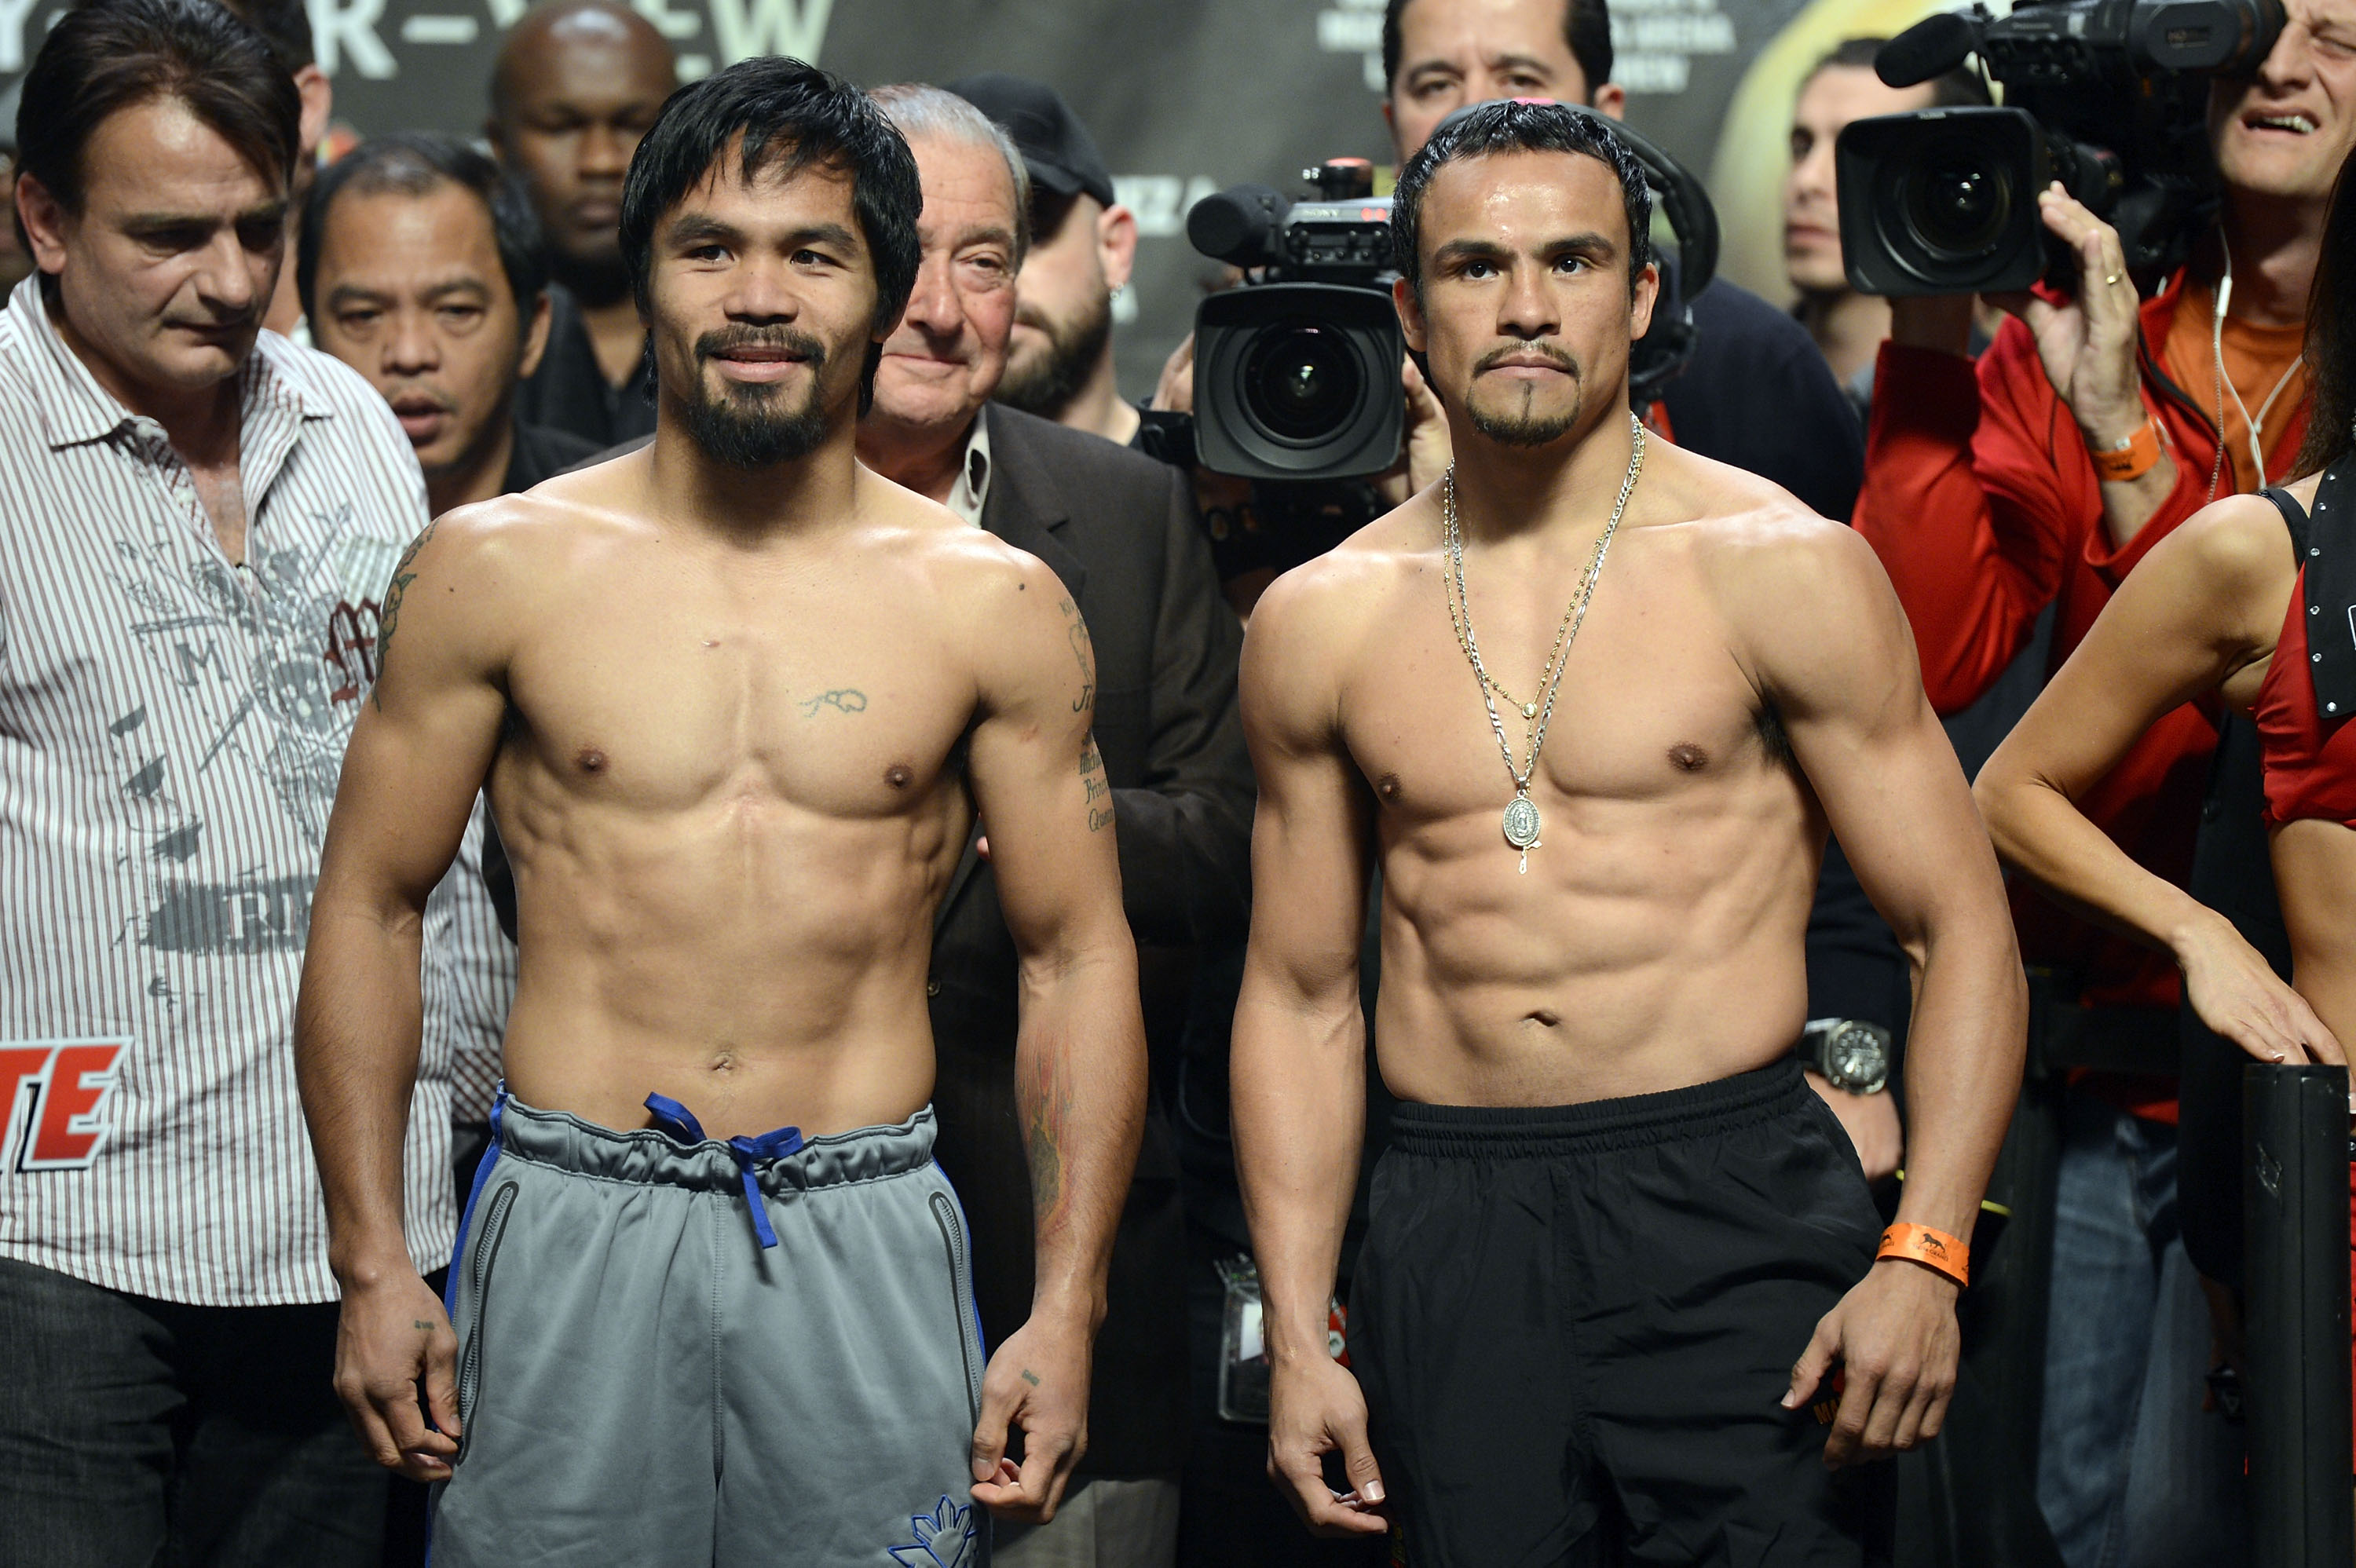 It was the first time the coaches saw each other thanks to Juan Manuel Marquez and Manny Pacquiao (Image: Gettyimages)